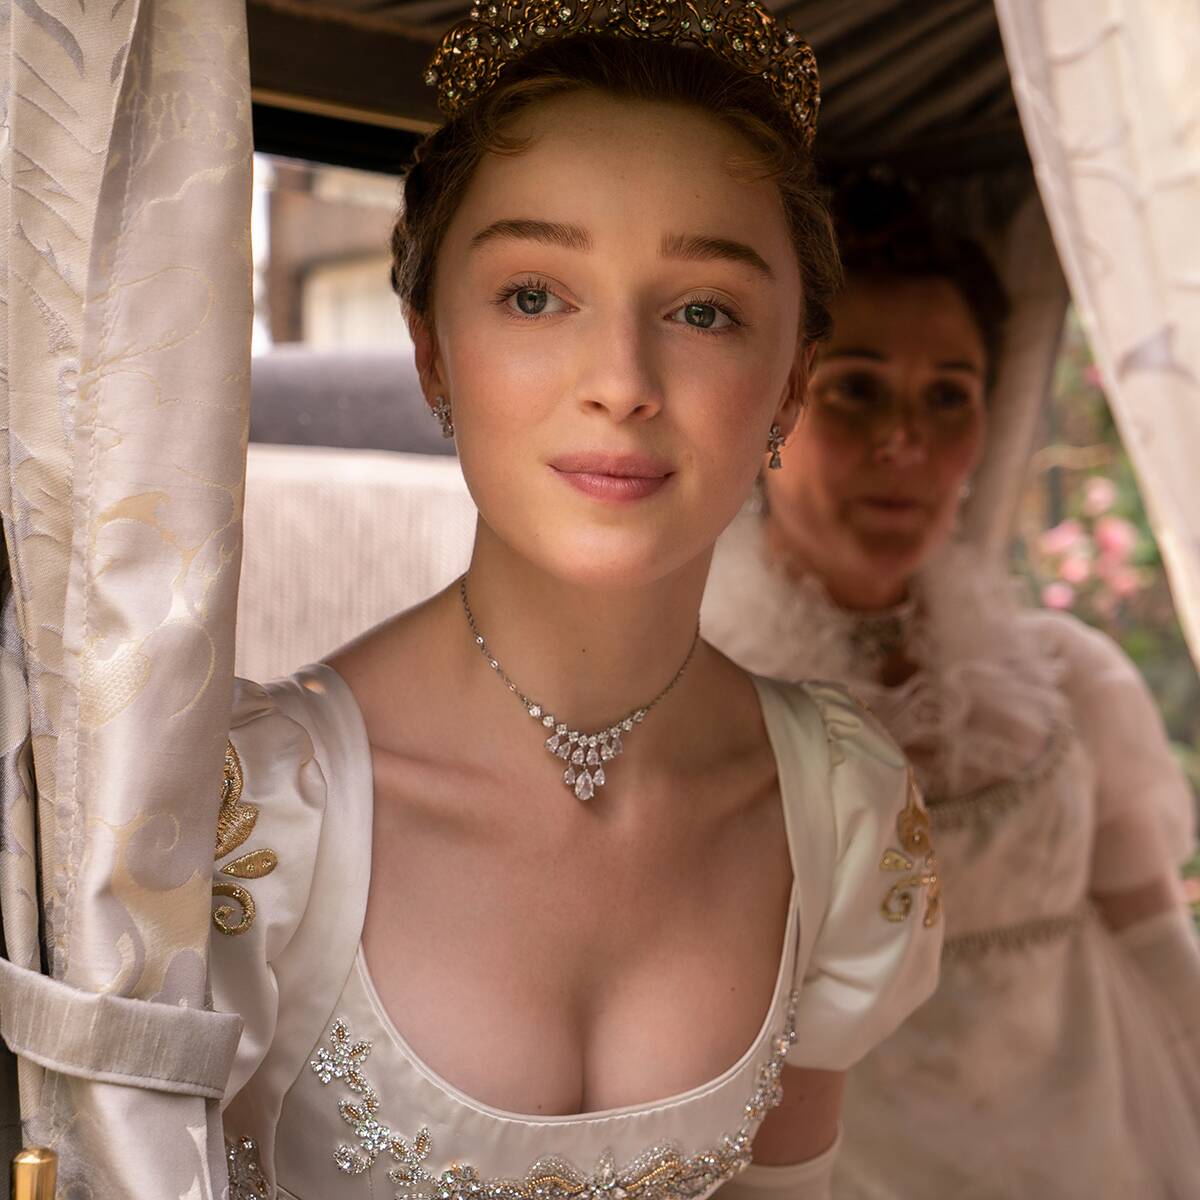 Bridgerton's Phoebe Dynevor Reacts to the Internet's Obsession With Her "Neck Acting"